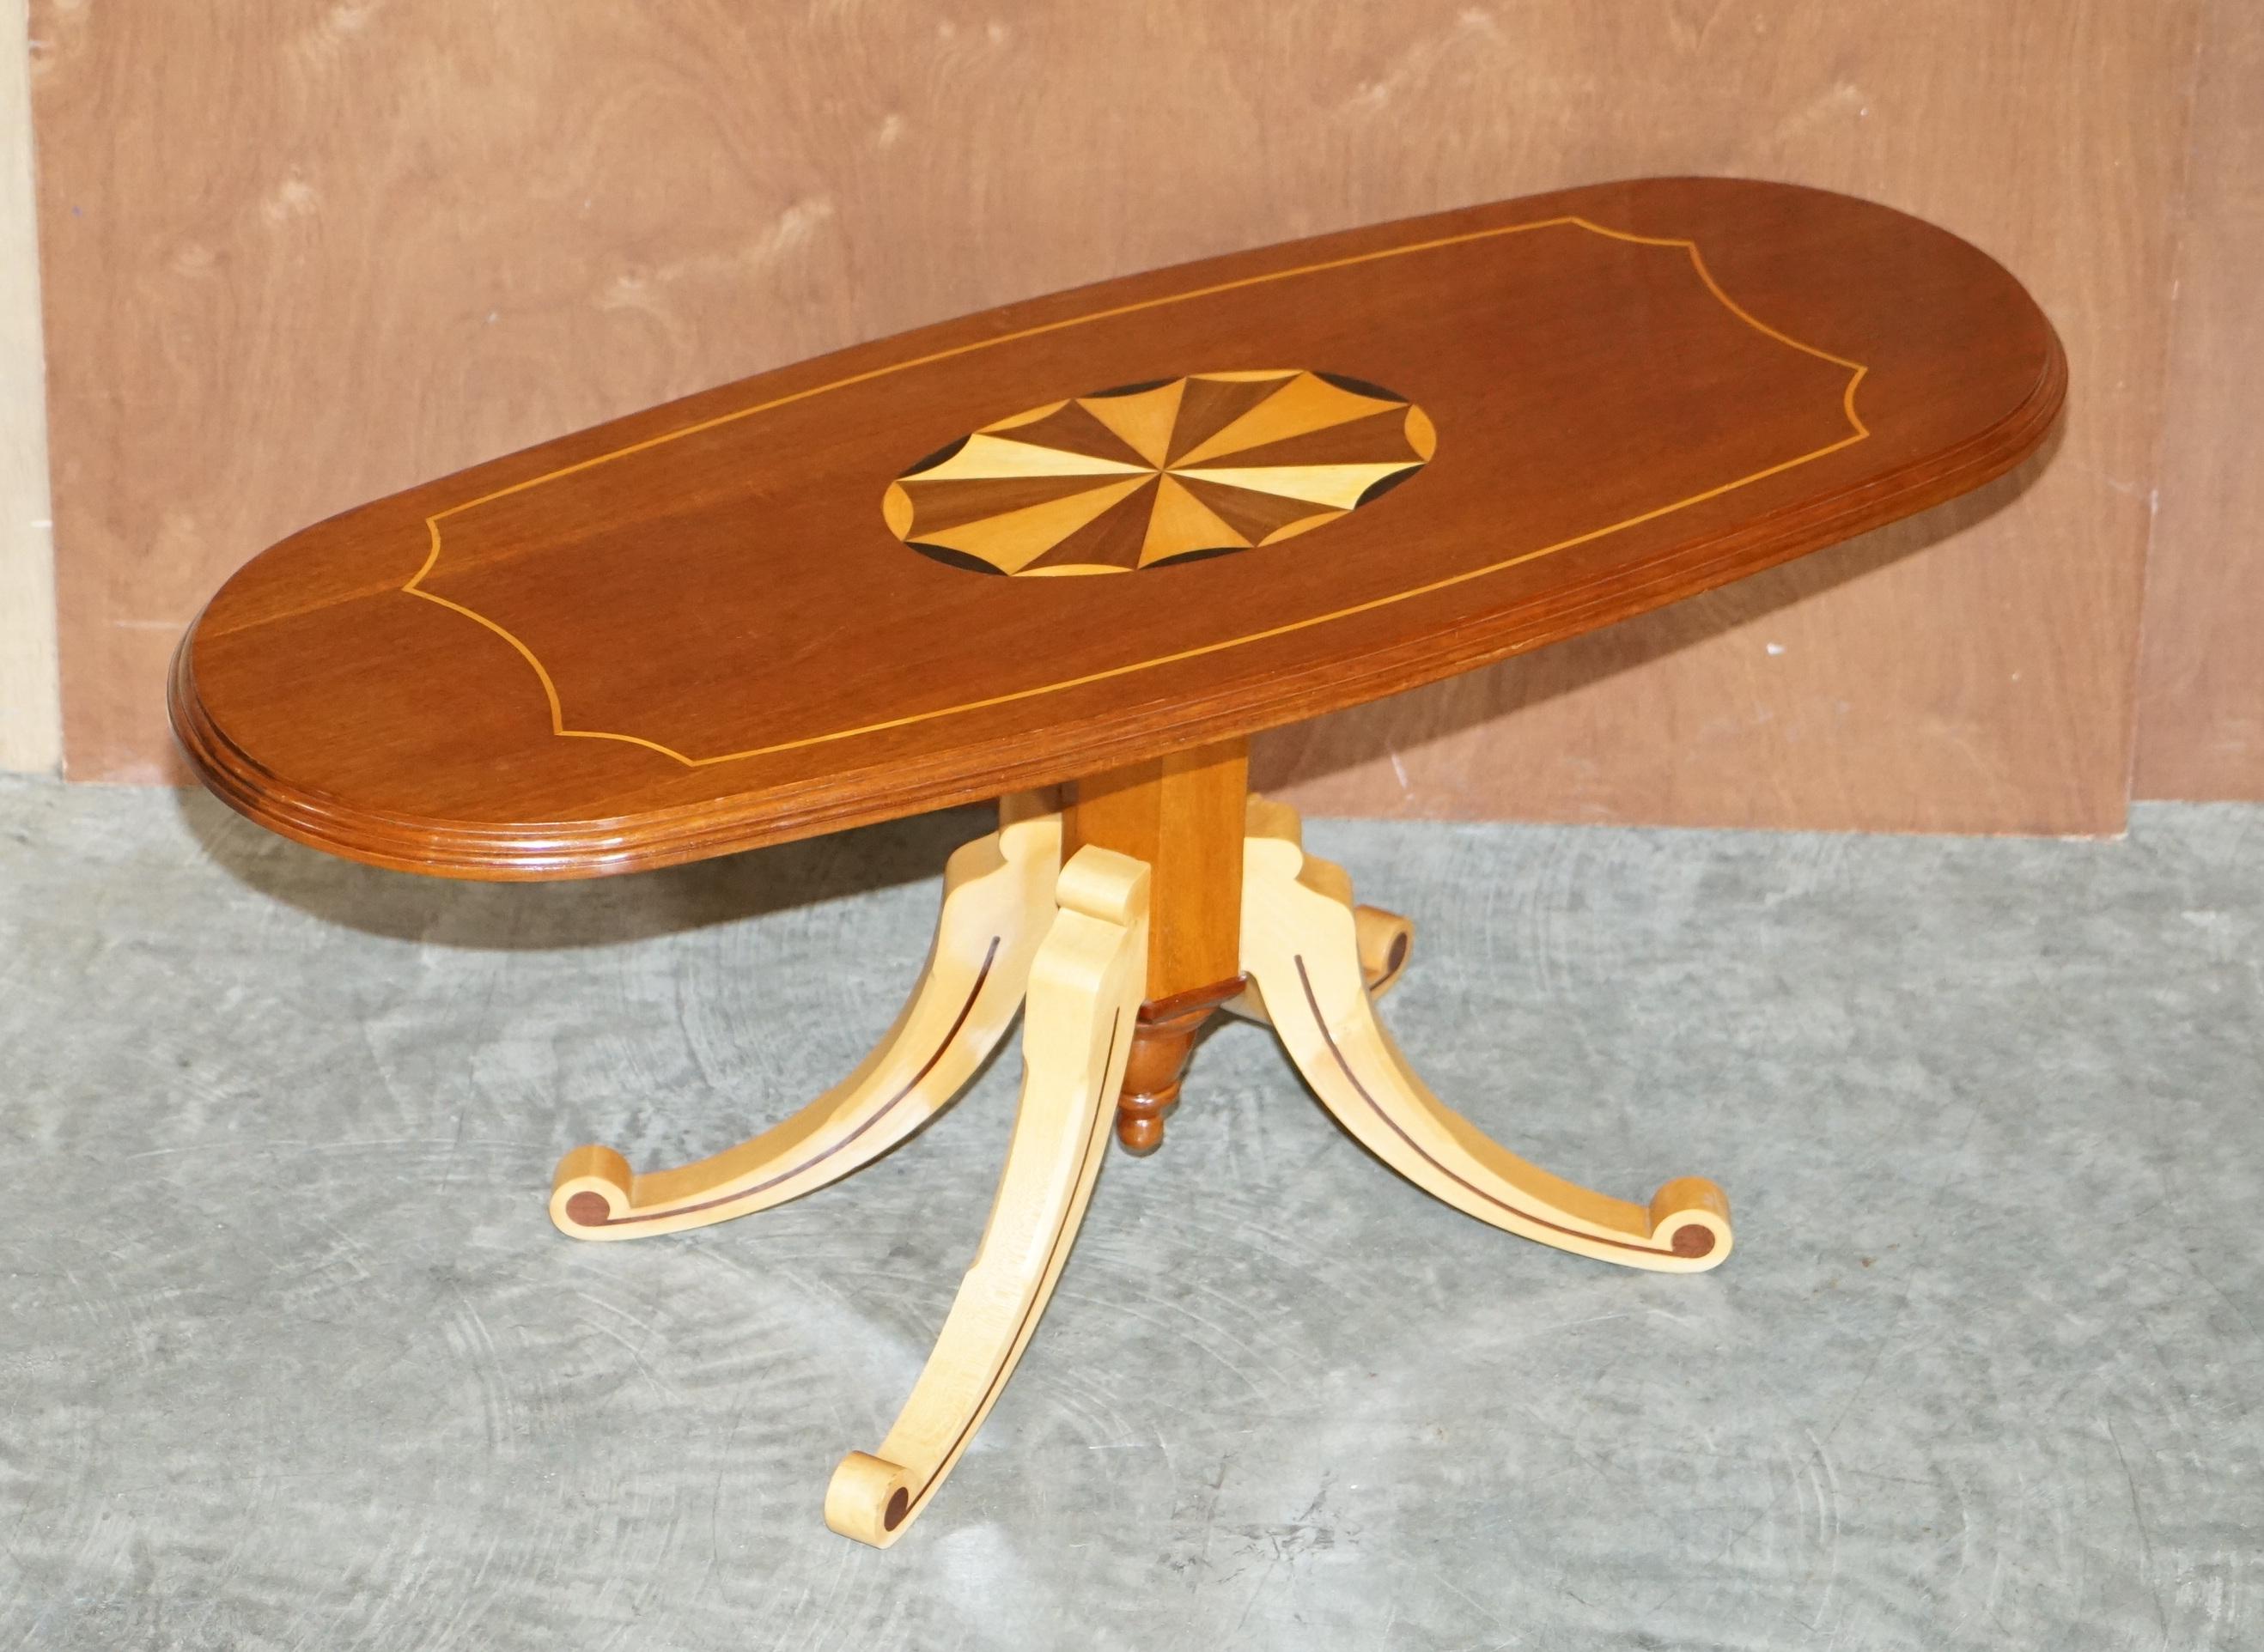 We are delighted to offer for sale this lovely maple and mahogany oval coffee table with Sheraton inlay in the Viscount David Linley style

A very good looking and well made table, it is cut from solid chunks of maple and mahogany, it is very